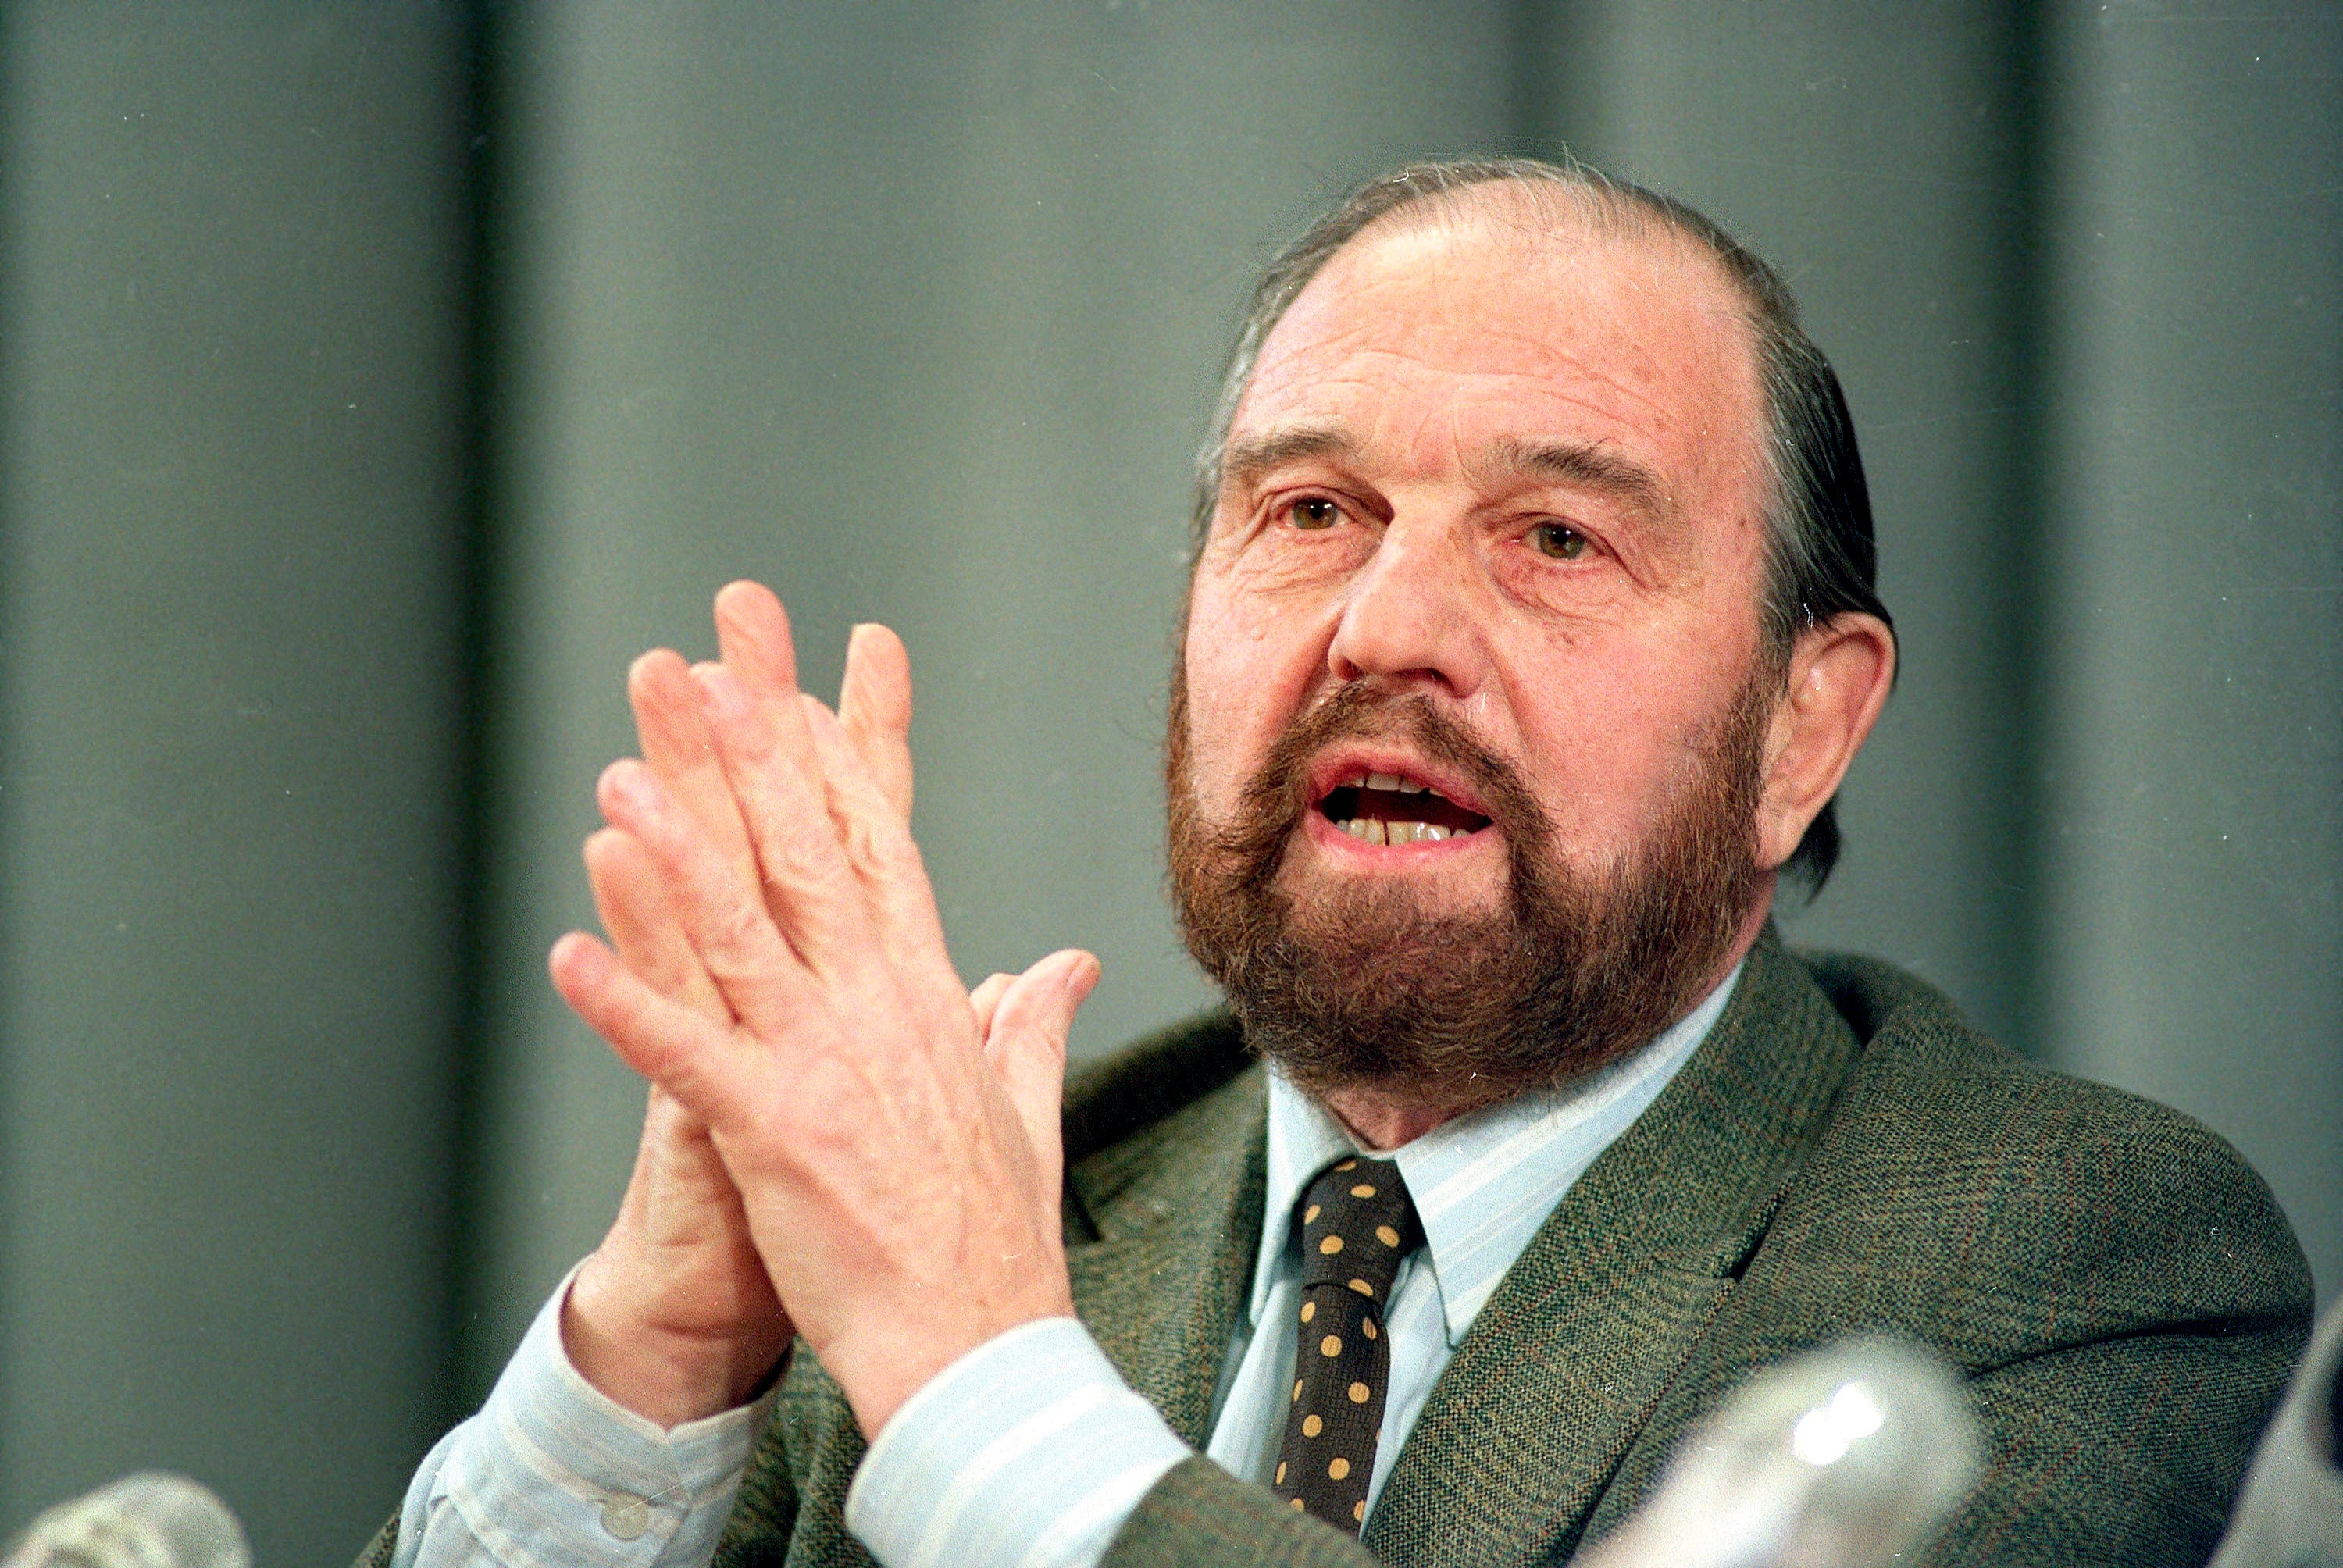 Blake gestures during a January 1992 news conference in Moscow, his home for 54 years after escaping from a London prison